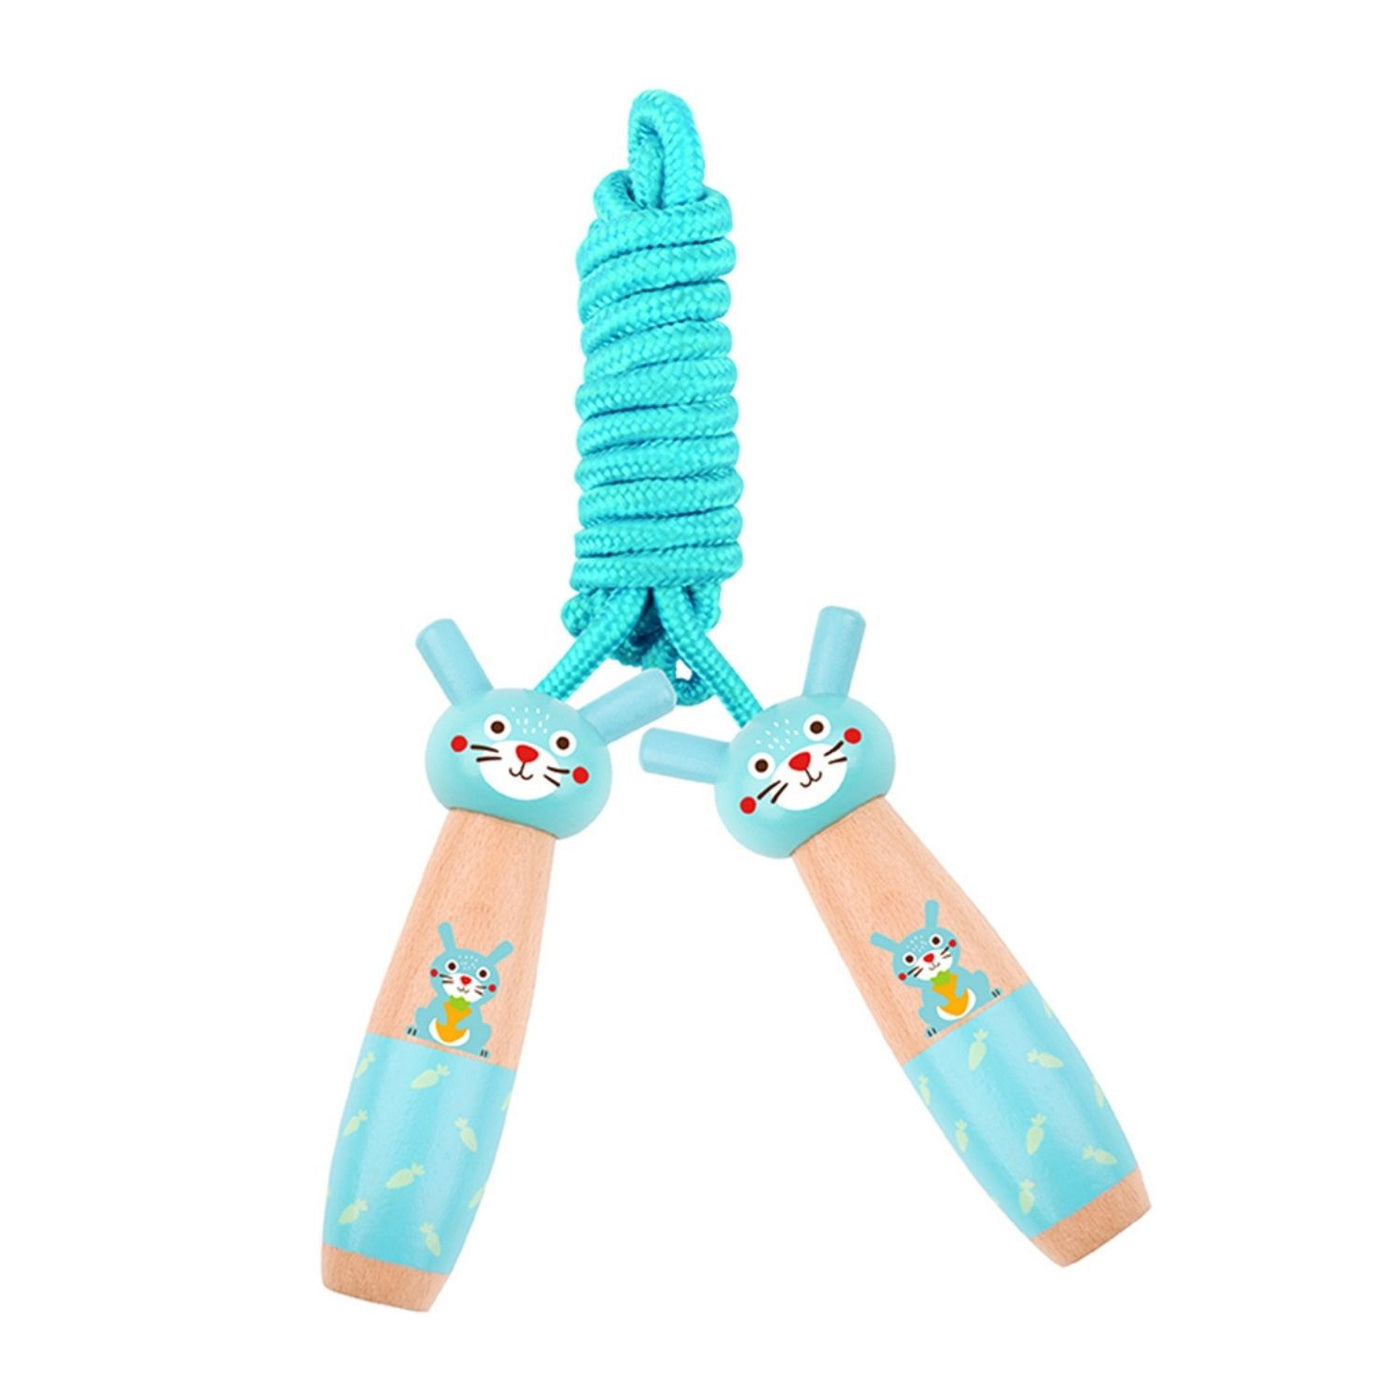 TookyToy Skipping Rope - Blue